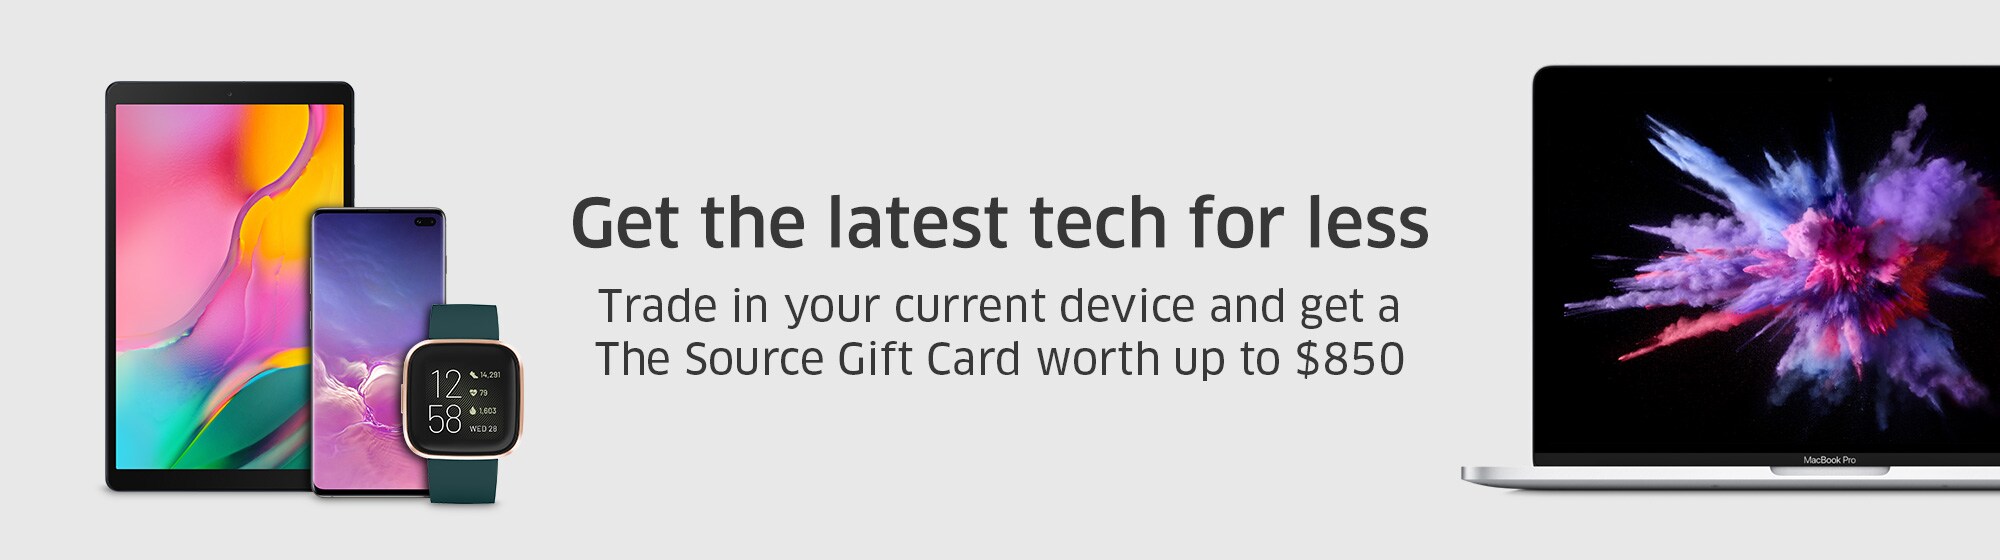 Get the latest tech for less Trade in your current device and get a The Source Gift Card worth up to $850